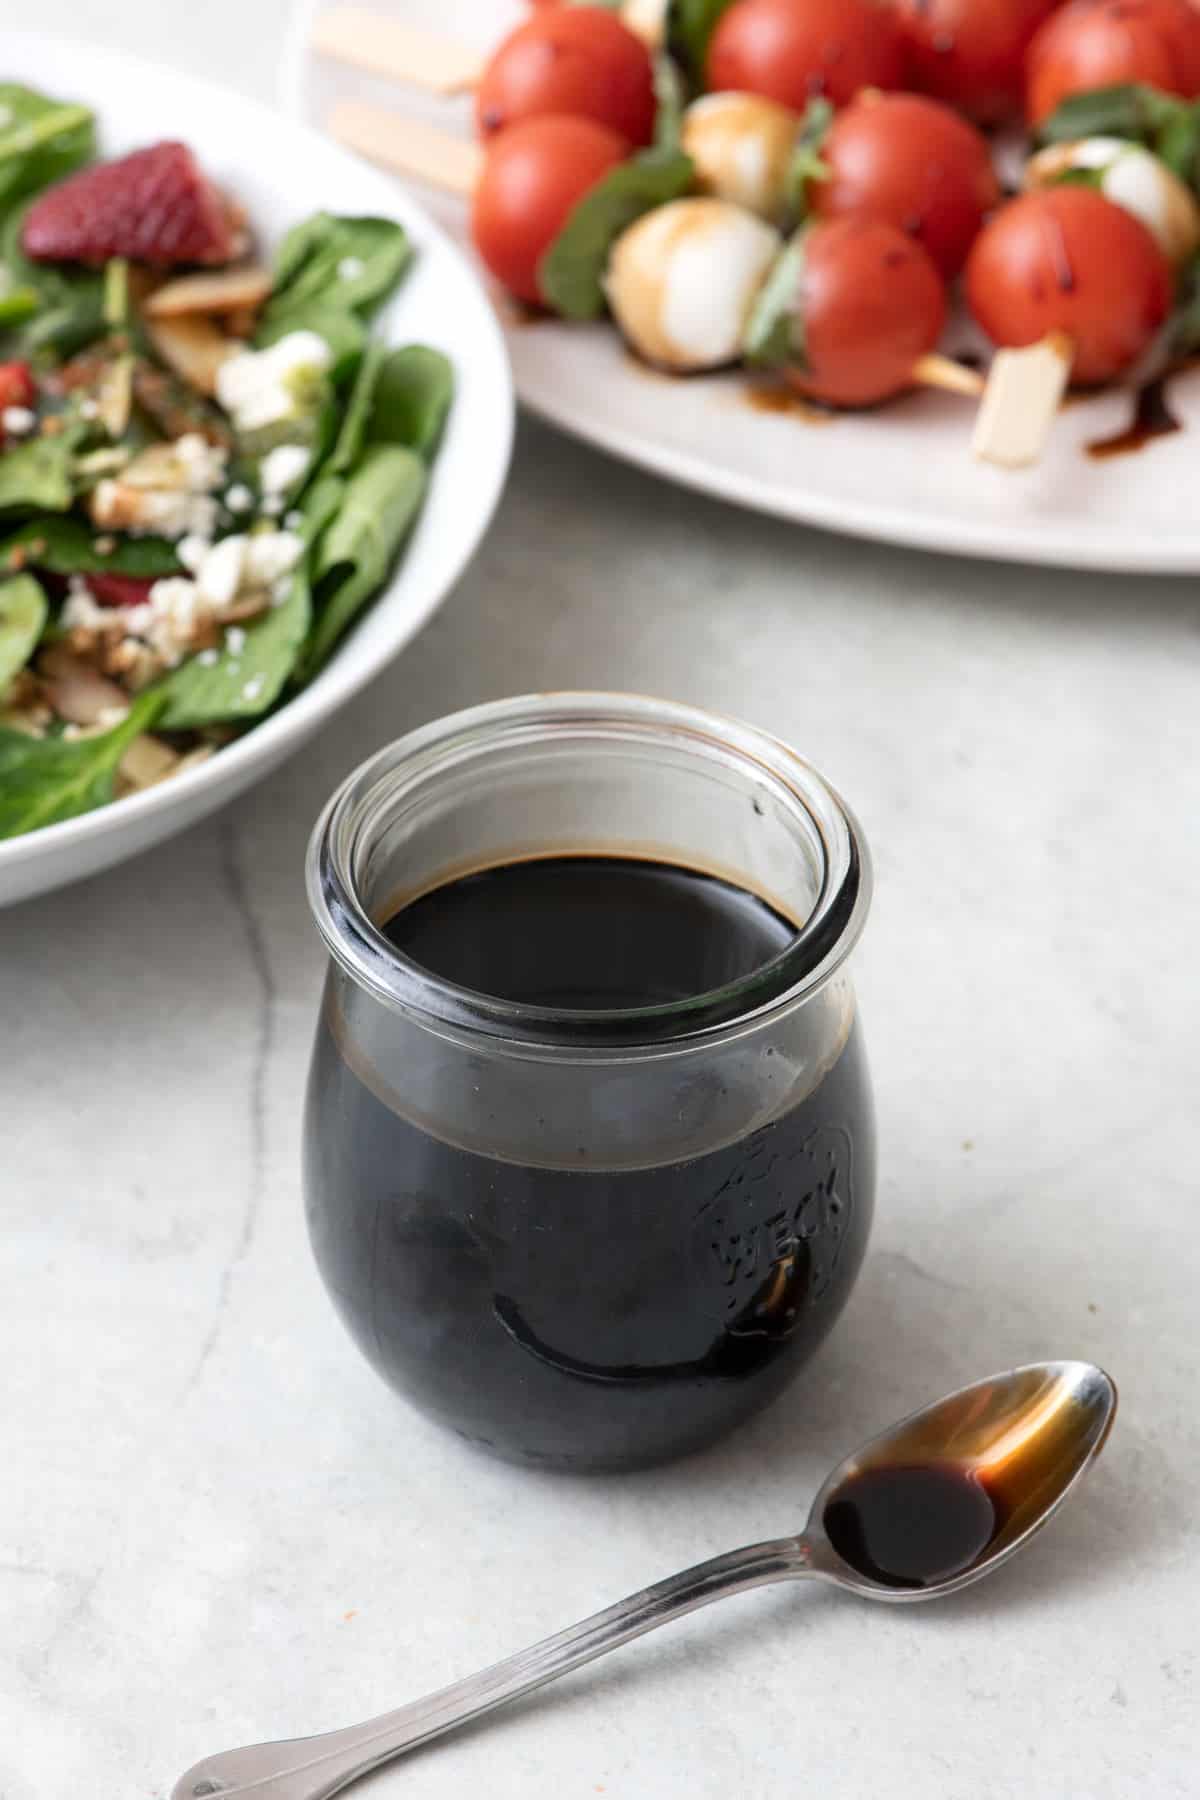 Small jar of balsamic glaze with a spoon sitting nearby. A fresh salad and caprese skewers in the background with the balsamic glaze drizzled on them.